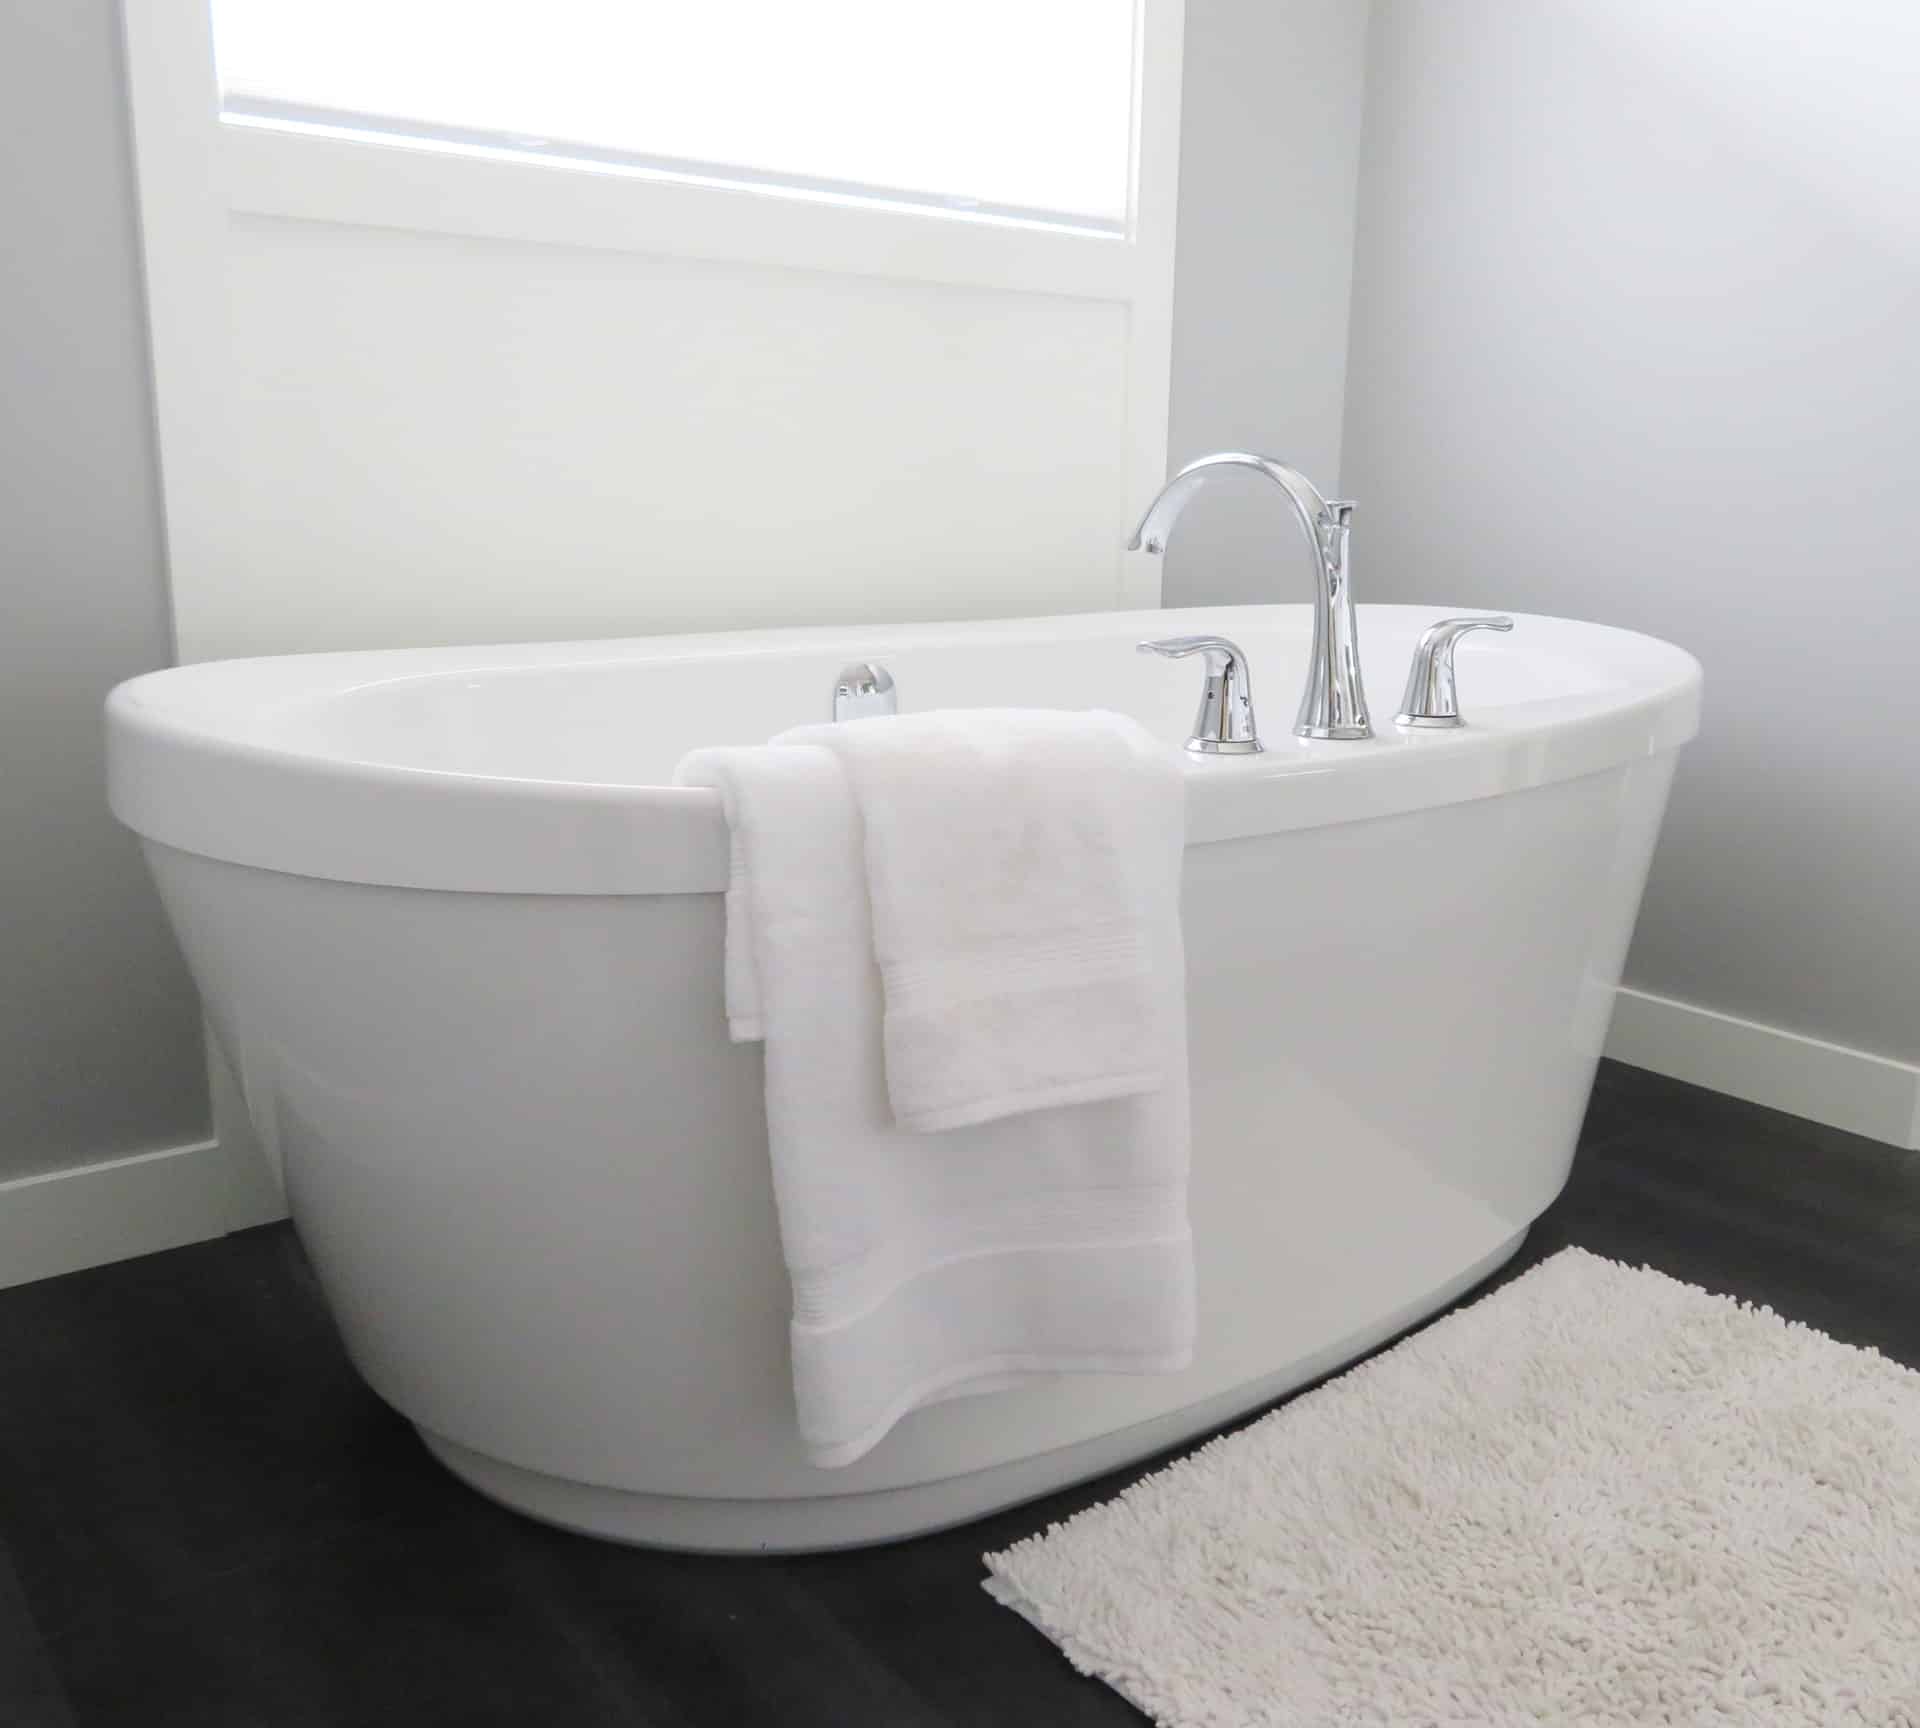 When Should You Have Your Bathtub Refinished